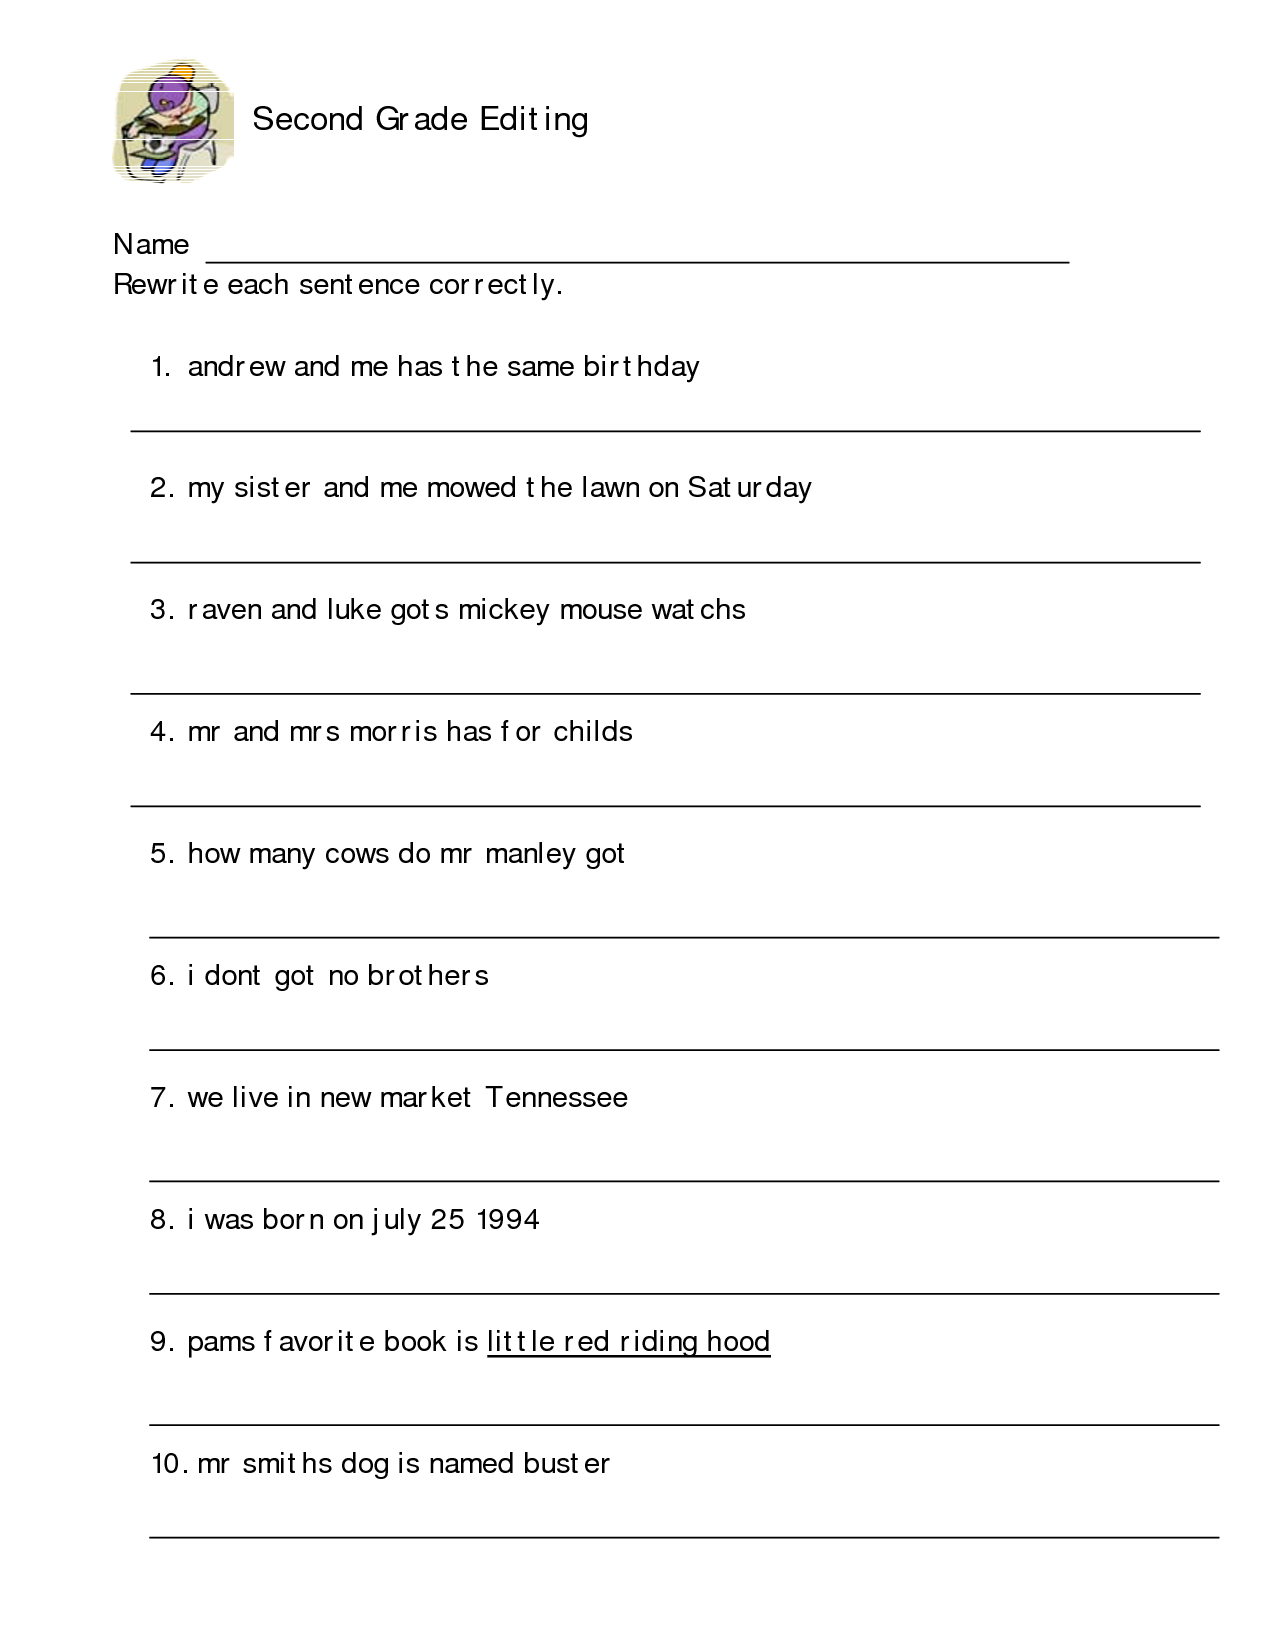 12-best-images-of-editing-worksheets-3rd-grade-5th-grade-paragraph